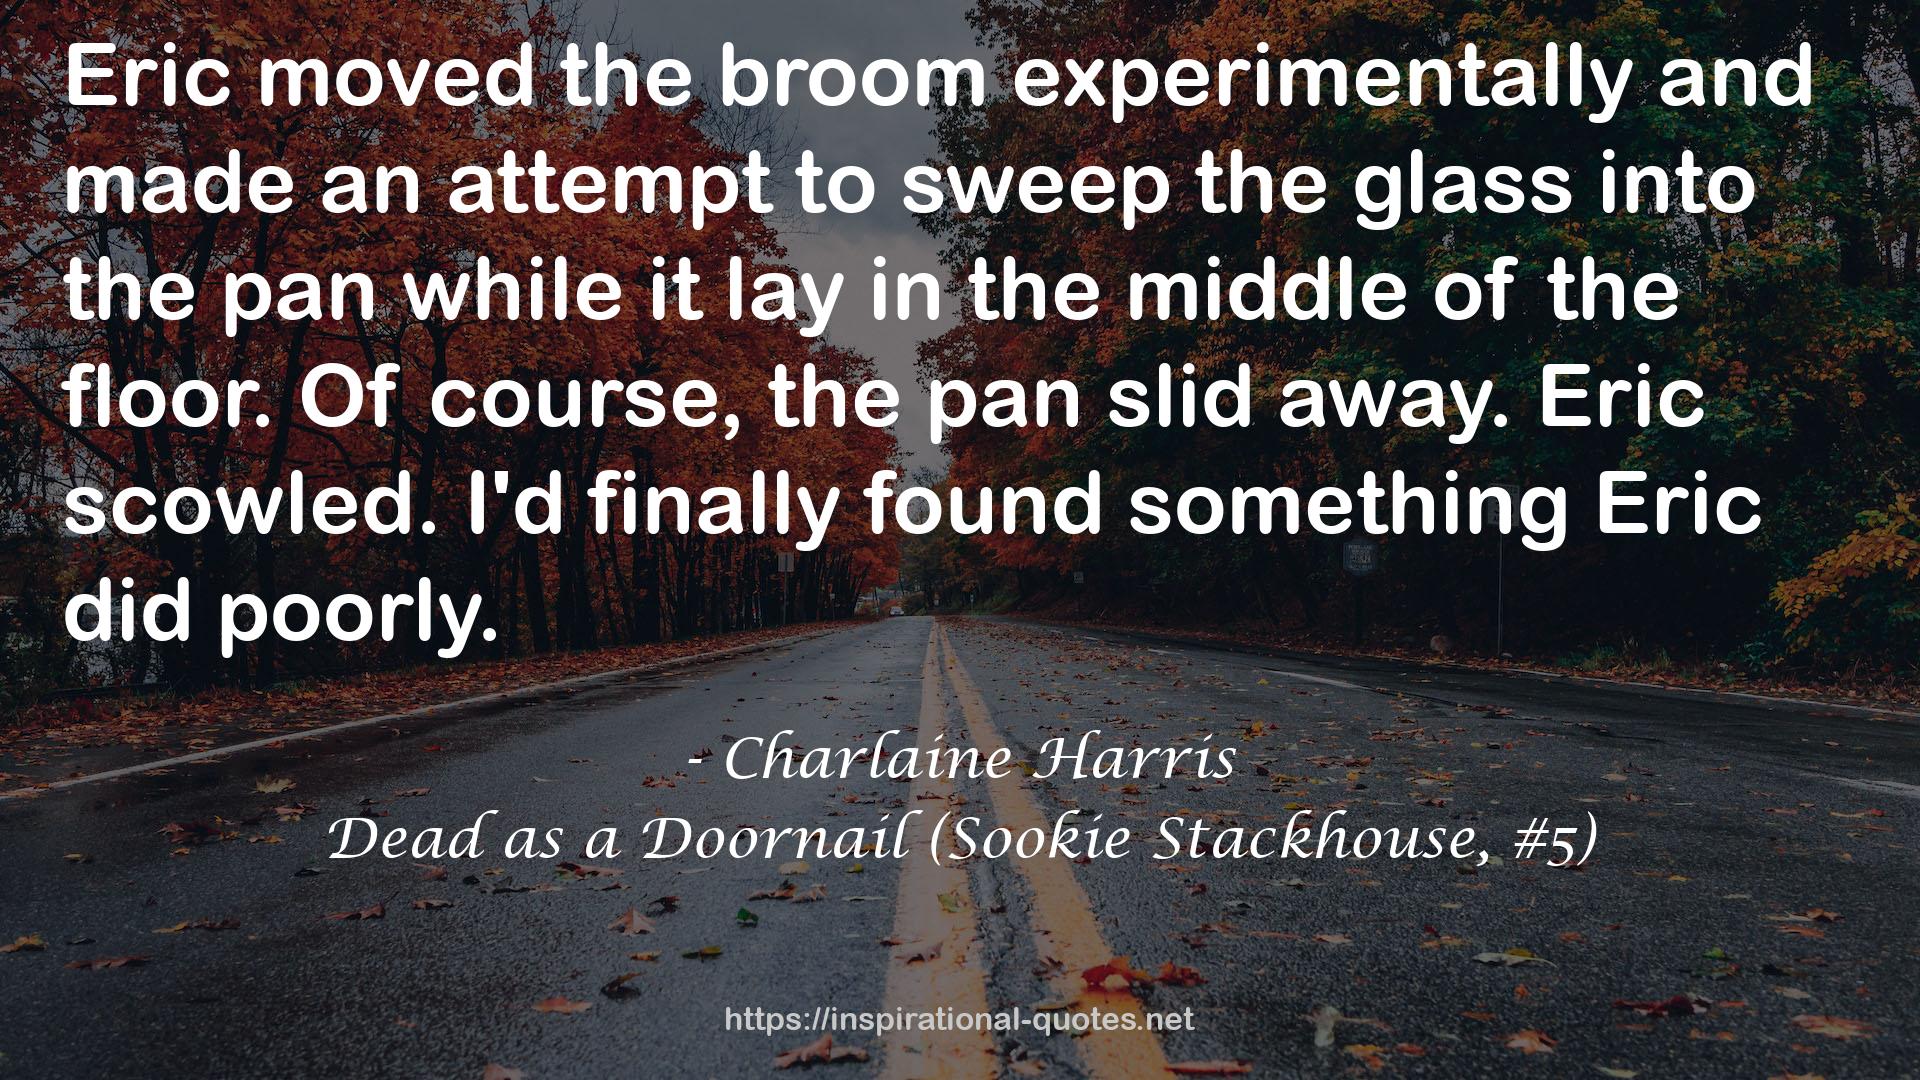 Dead as a Doornail (Sookie Stackhouse, #5) QUOTES